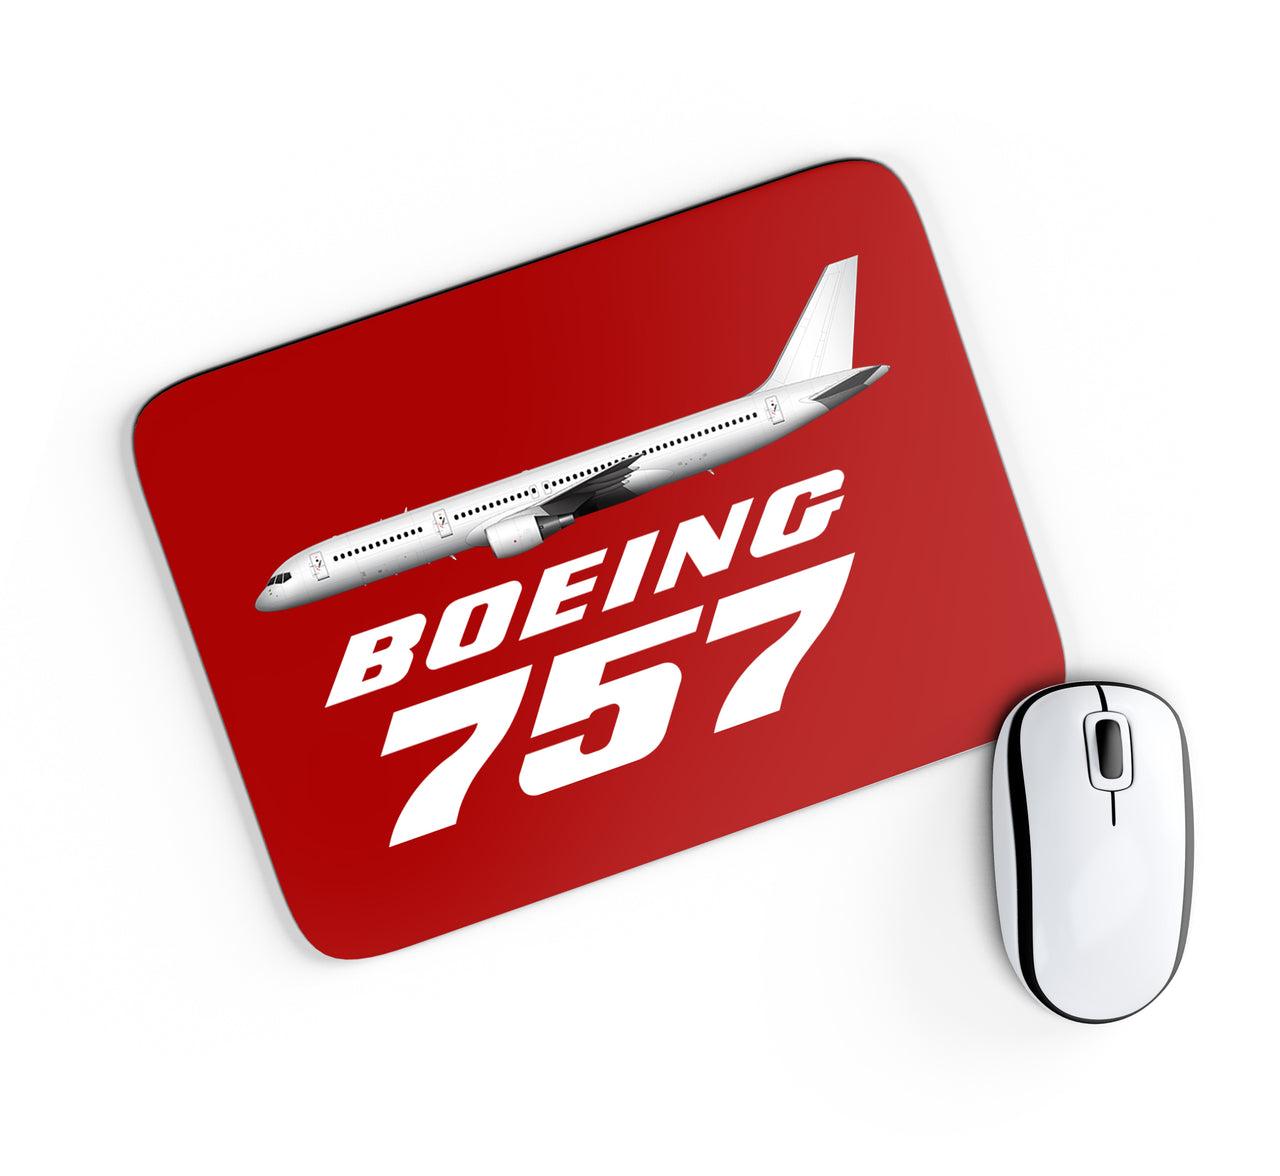 The Boeing 757 Designed Mouse Pads